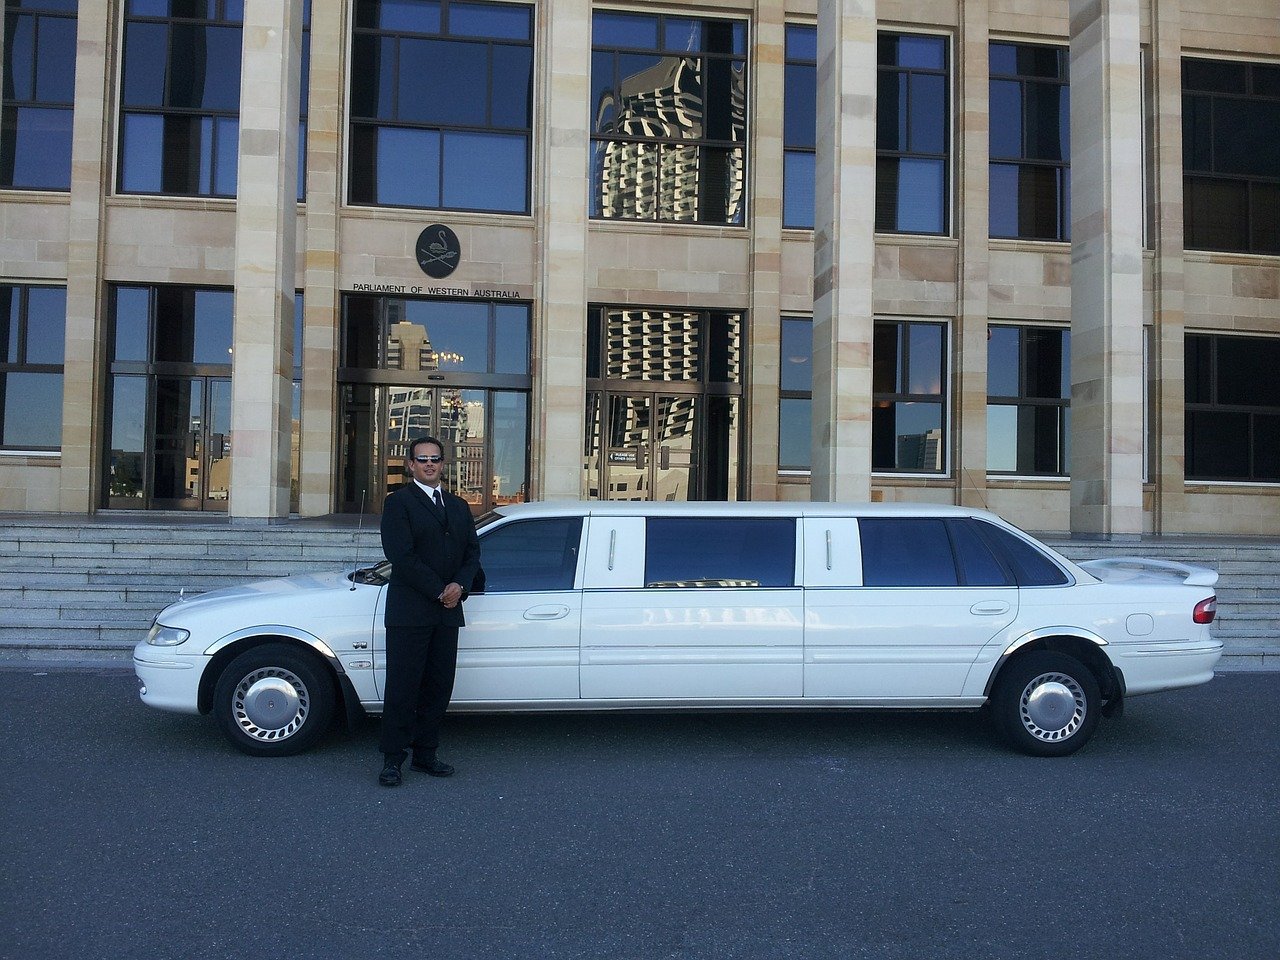 A chauffeur by a limousine, ready to provide limo services